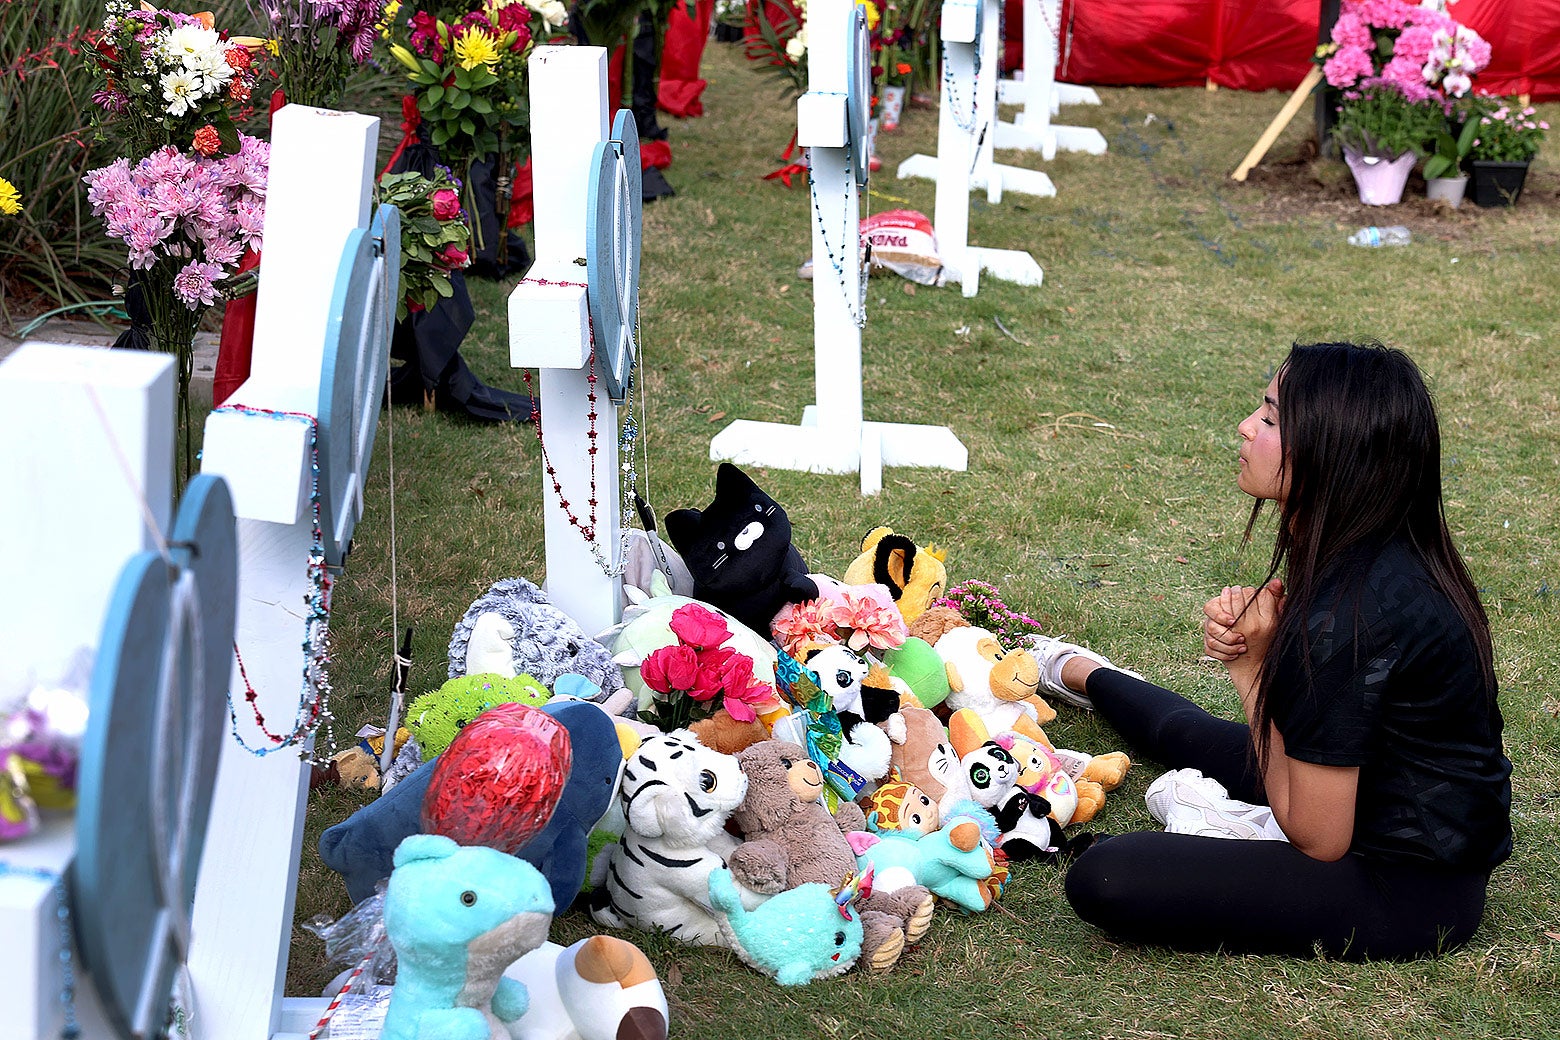 A young woman sits on the ground and prays in front of a row of white crosses with a pile of stuffed animals left in front of it.